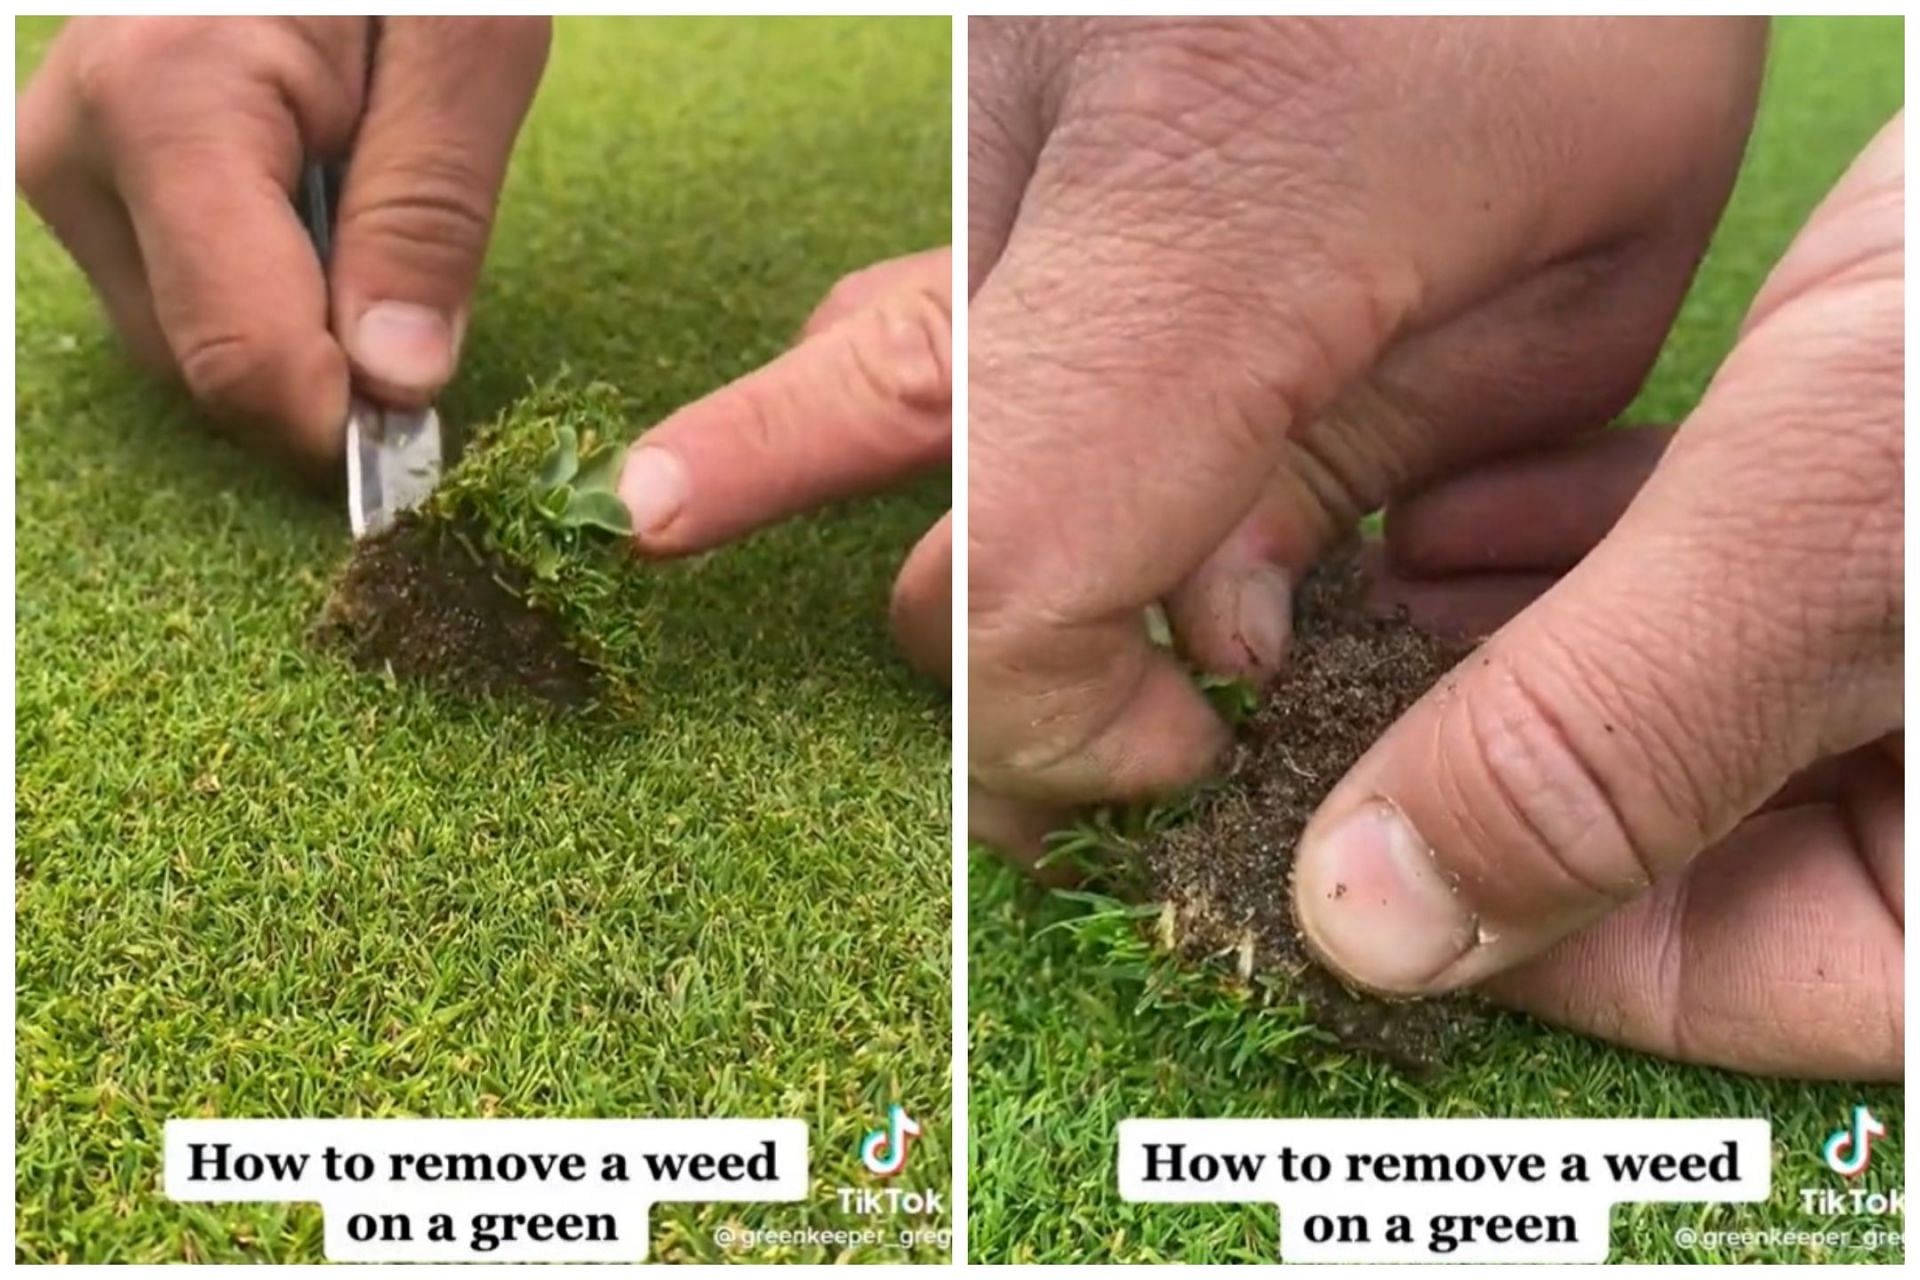 Head Greenskeeper carefully removes the weed from the green on the golf course (Image via Tiktok.com/greenkeeper_greg)